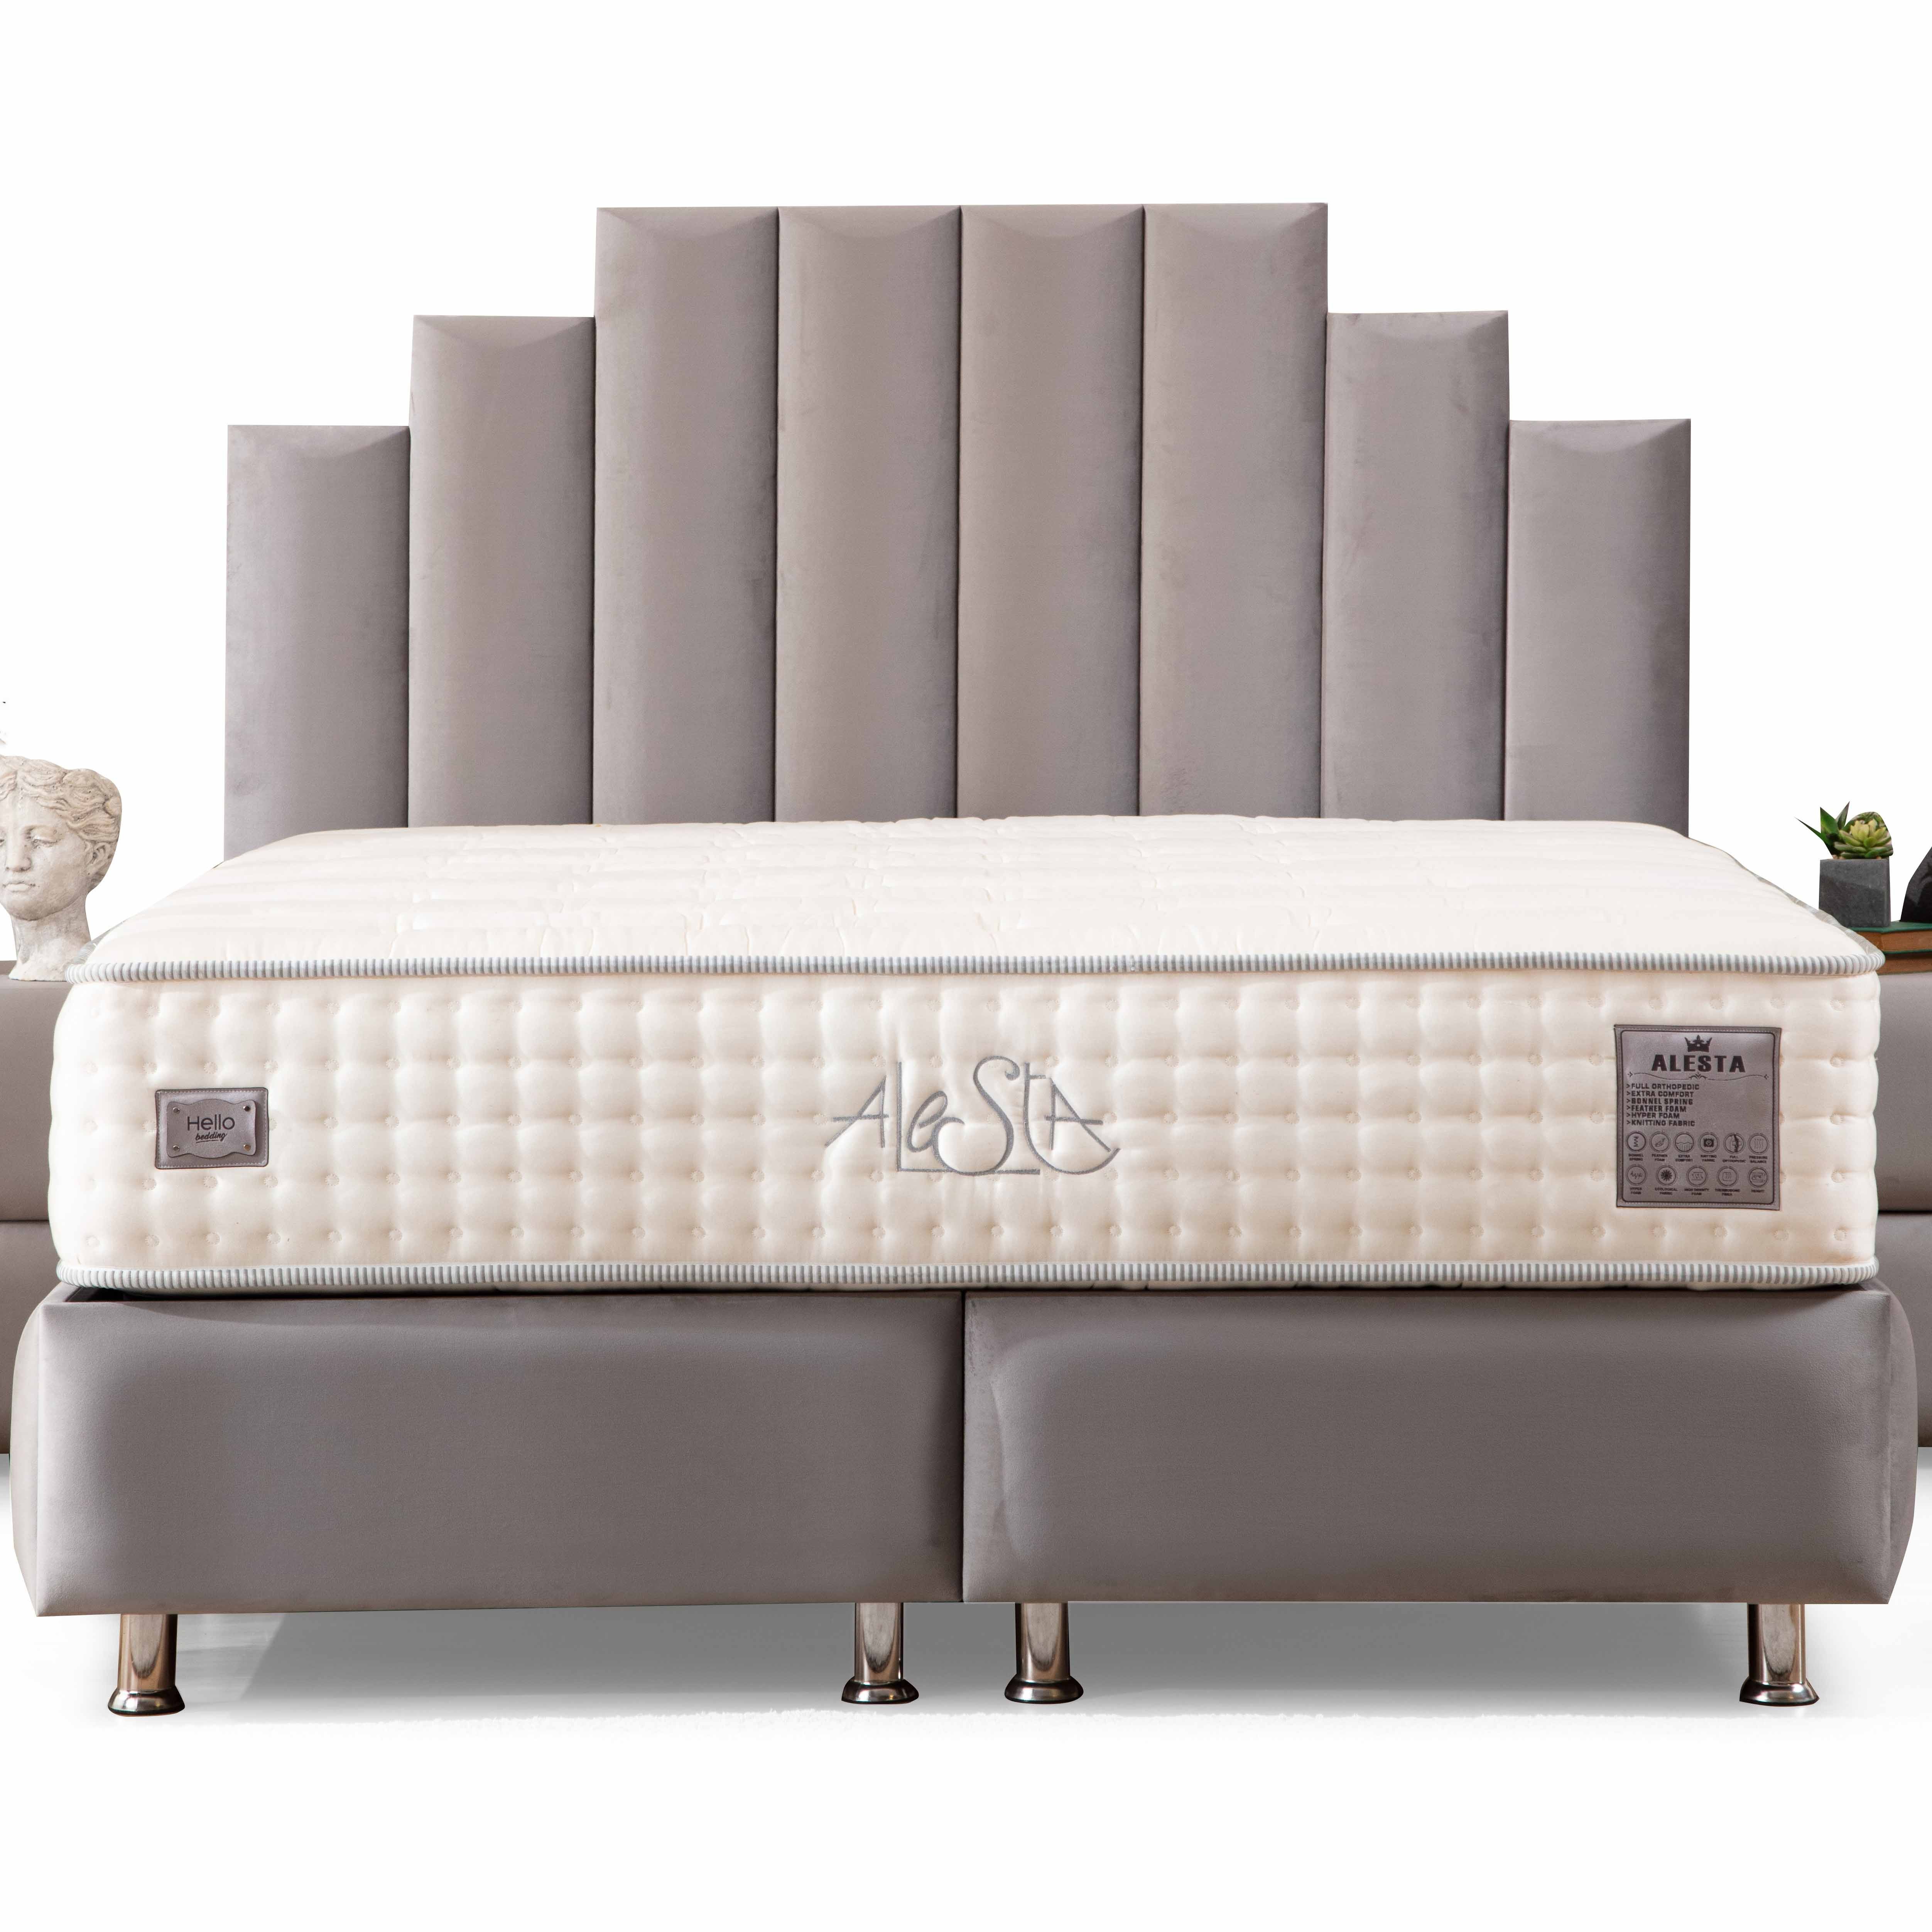 Natura Bed With Storage 160x200 cm